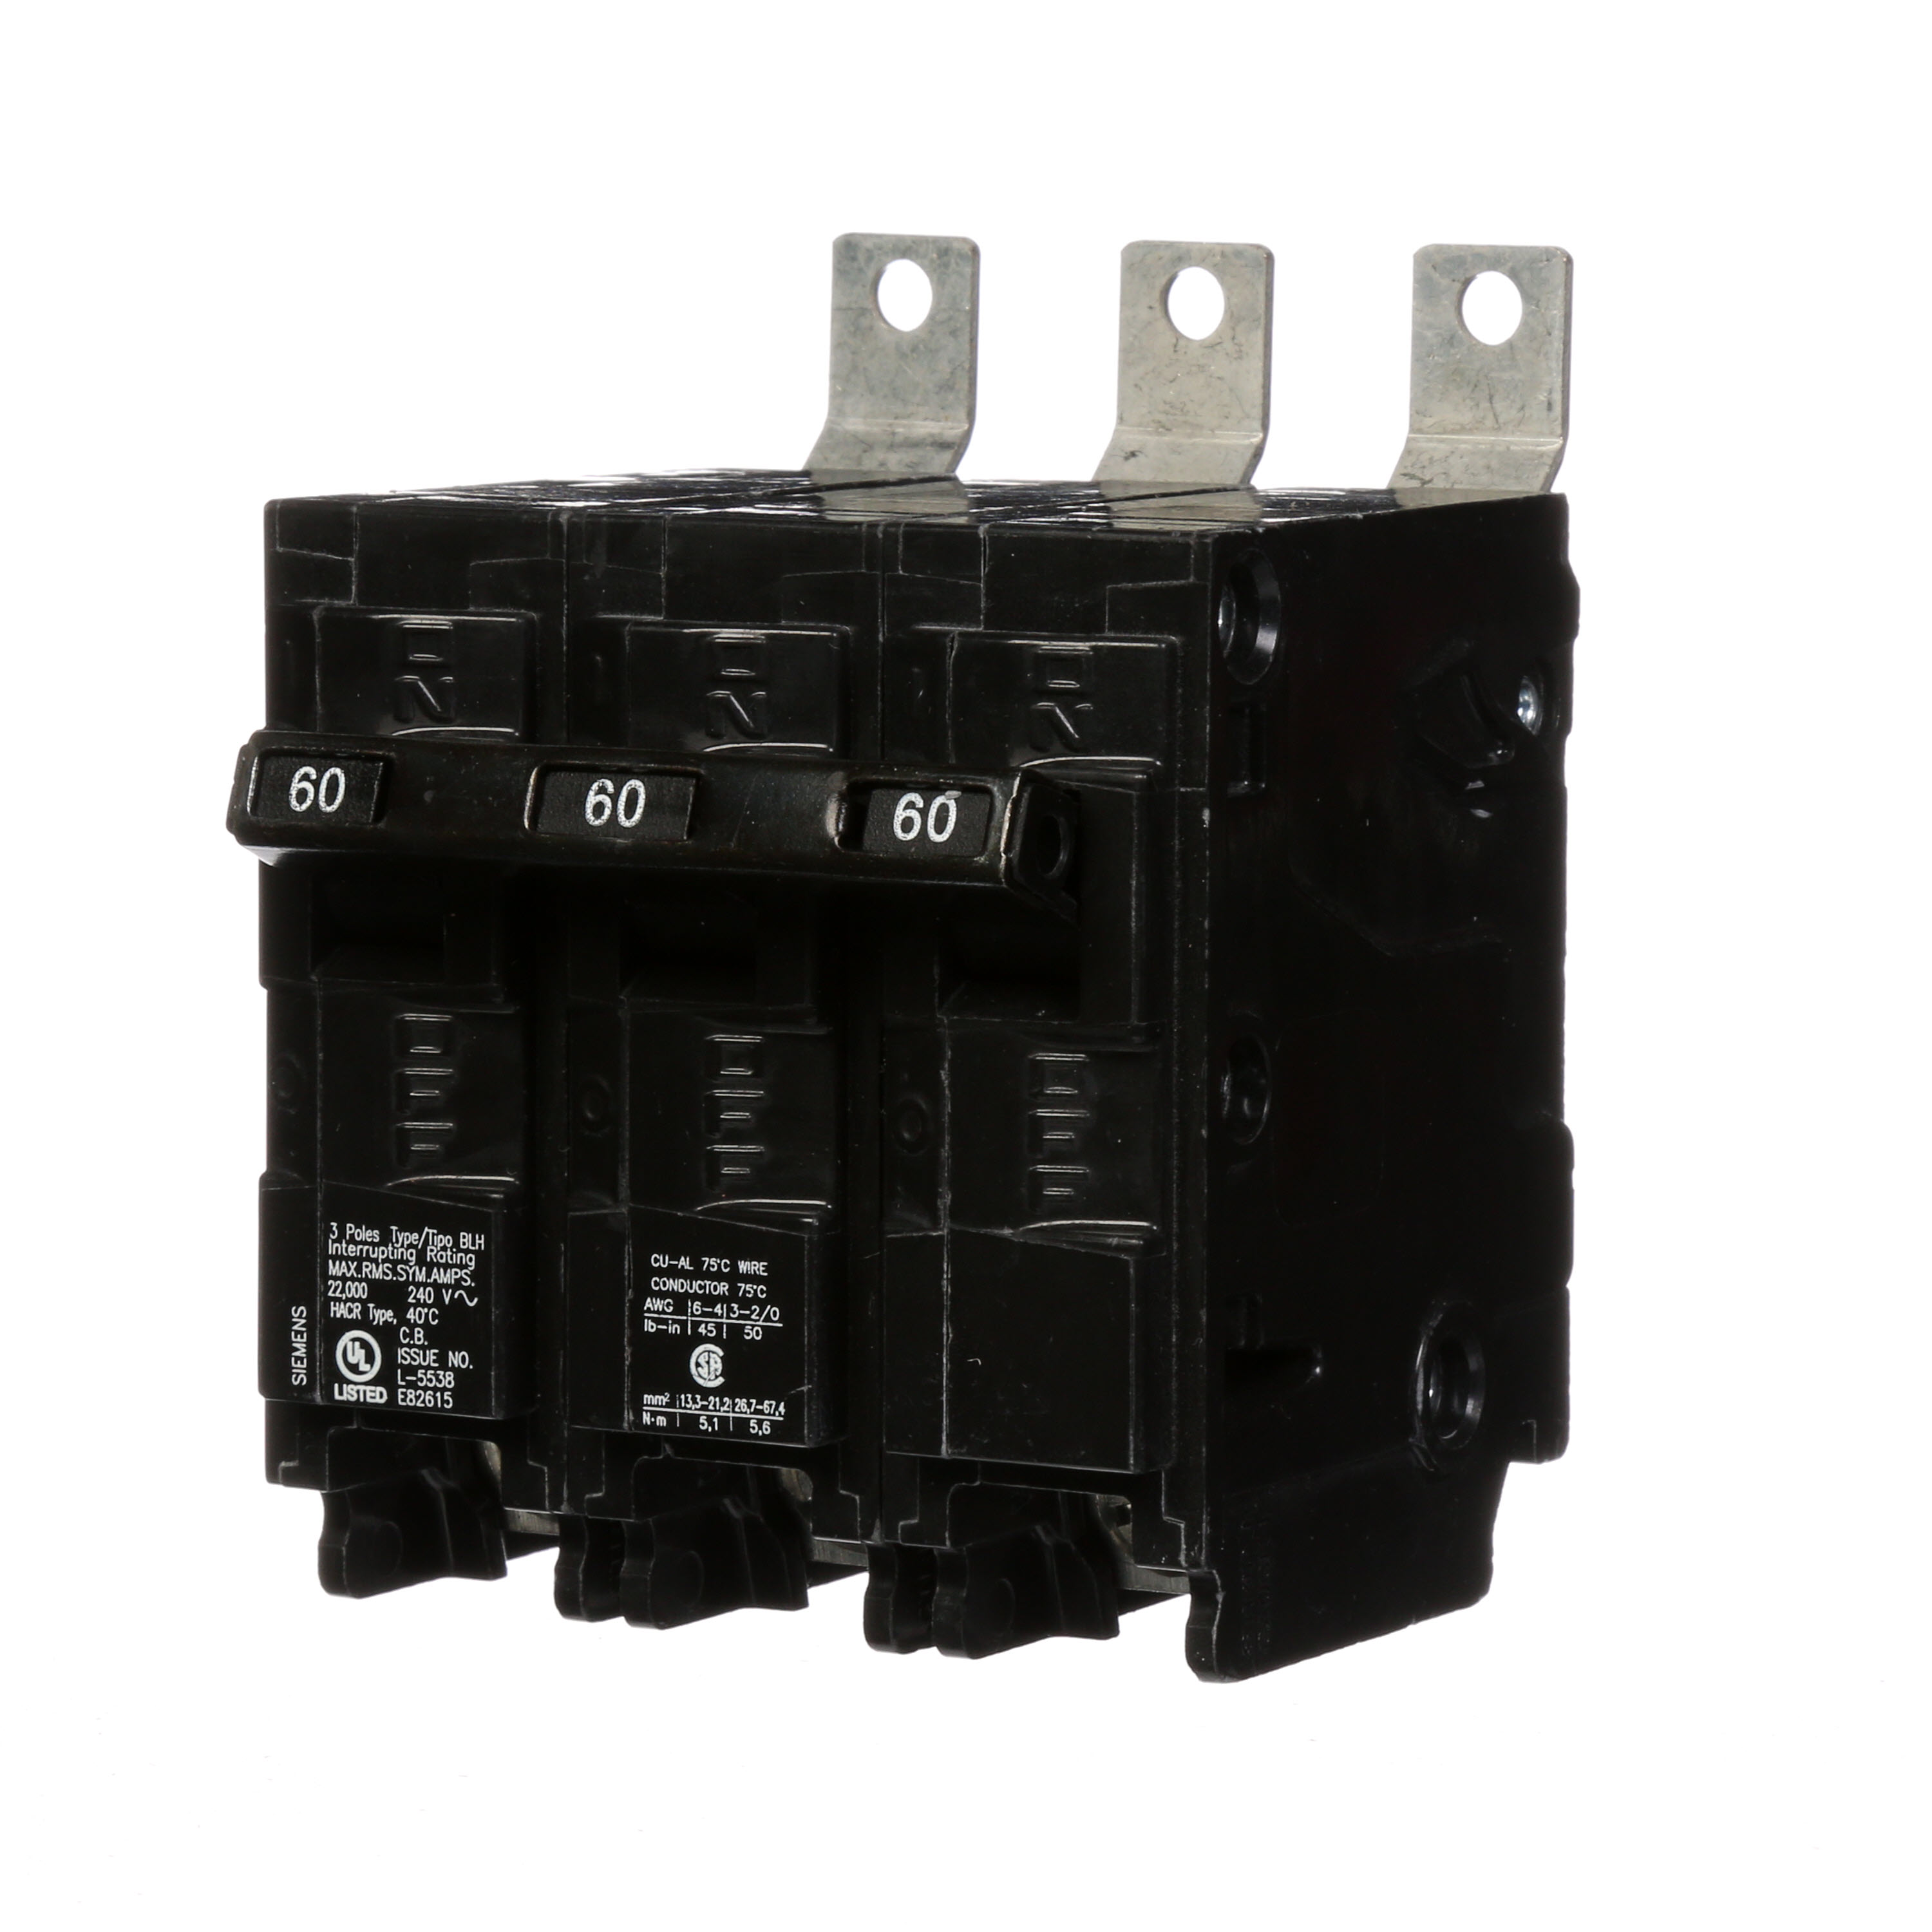 Siemens Low Voltage Molded Case Circuit Breakers Panelboard Mounting 240V Circuit Breakers - Type BL, 3-Pole, 240VAC are Circuit Protection Molded Case CircuitBreakers. BREAKER 60A 3P 240V 22K BLH